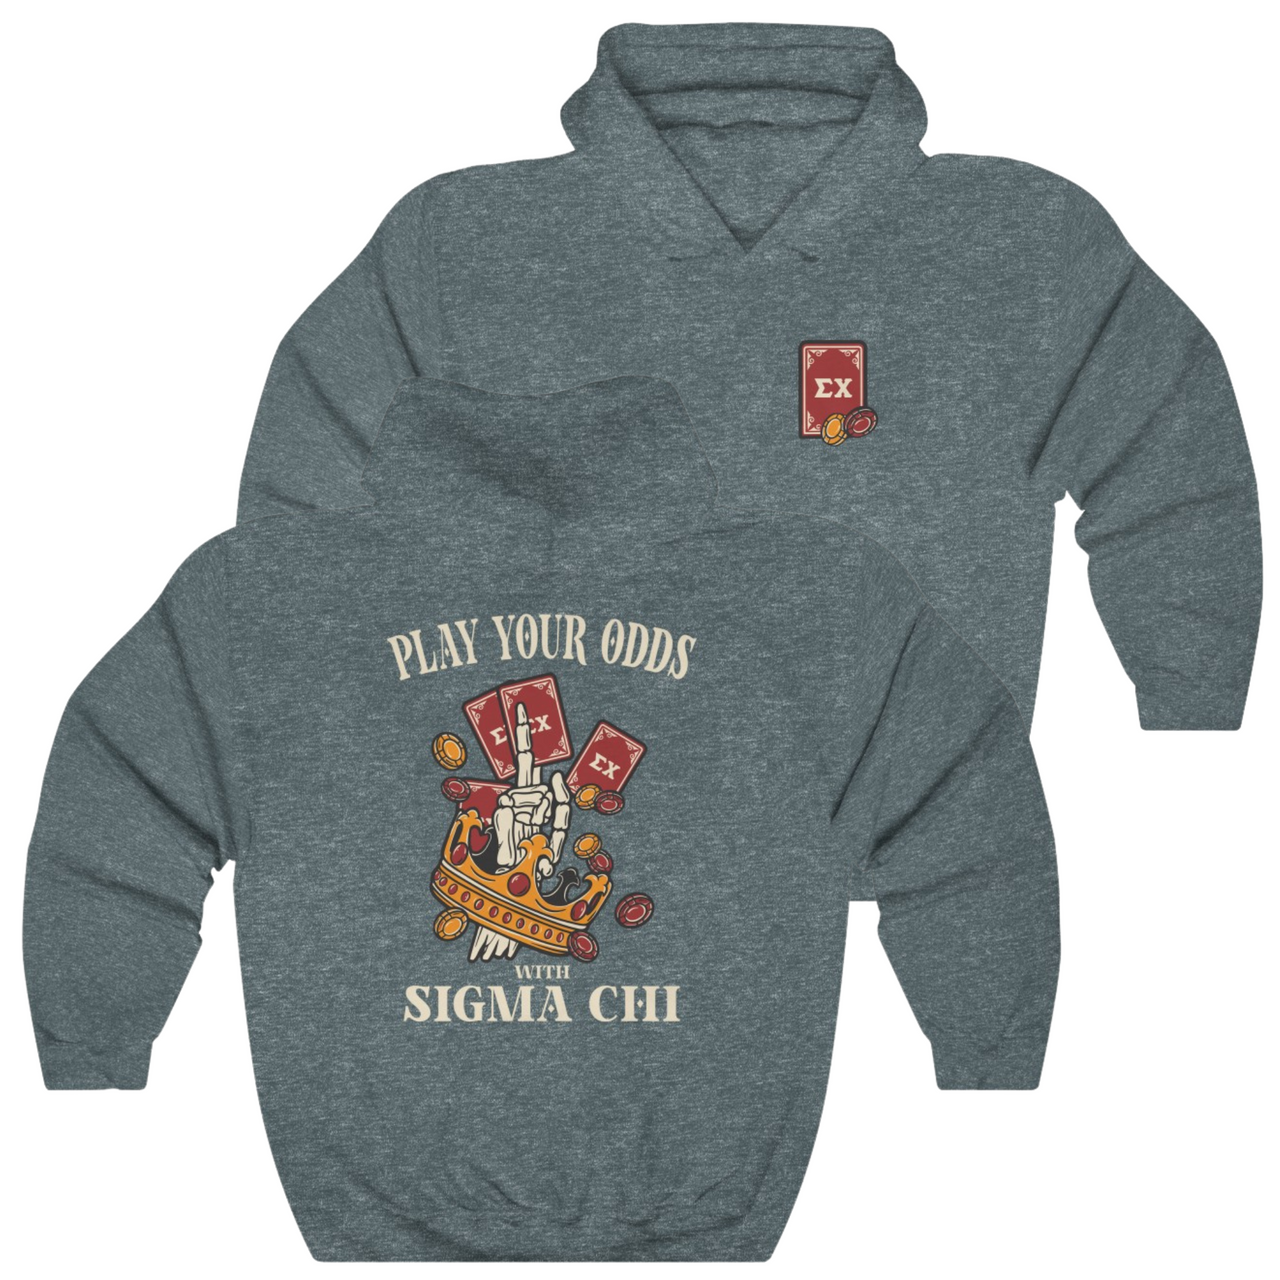 Grey Sigma Chi Graphic Hoodie | Play Your Odds | Sigma Chi Fraternity Merch House